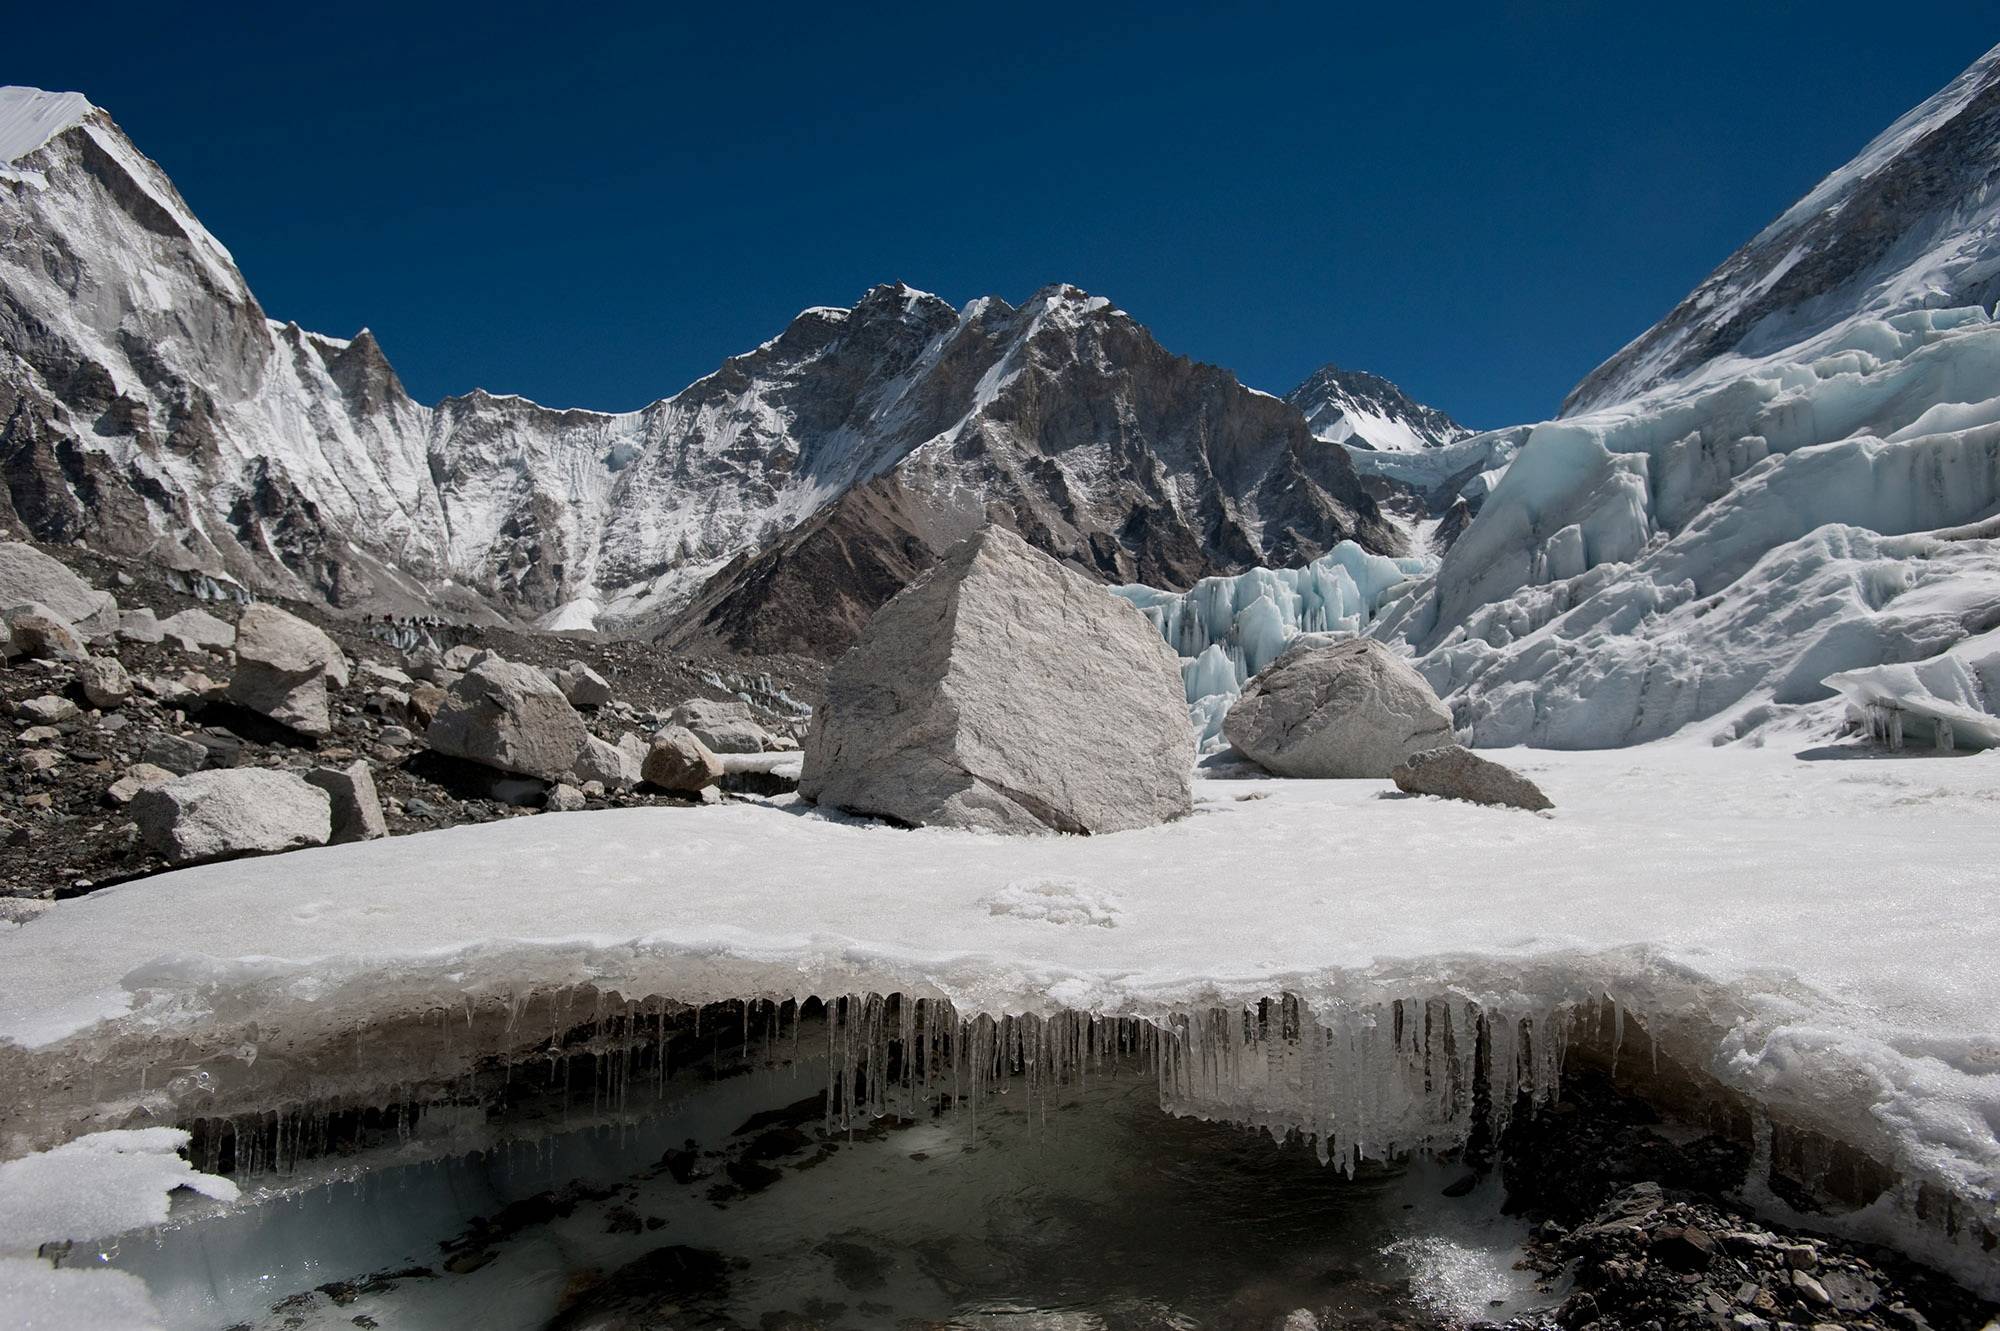 Water forms under Nepal's Khumbu glacier as the ice melts. At 1.5 degrees Celsius or 2 C of warming above preindustrial temperatures, glaciers across the entire region will lose 30% to 50% of their volume by the year 2100. | ICIMOD / VIA REUTERS 